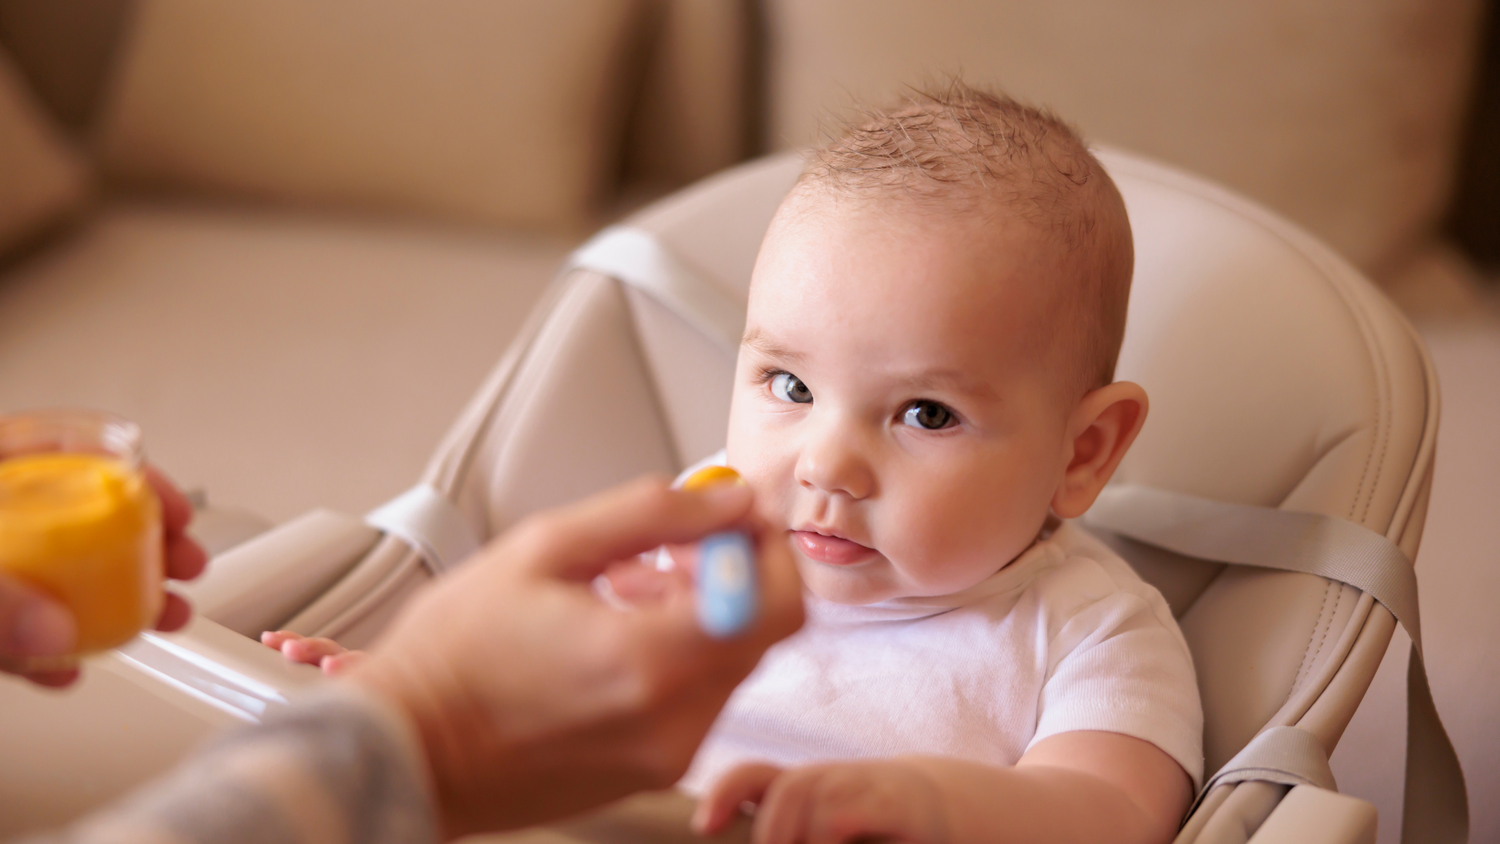 4 Best Ways to Introduce Solid Foods: A Guide for Parents